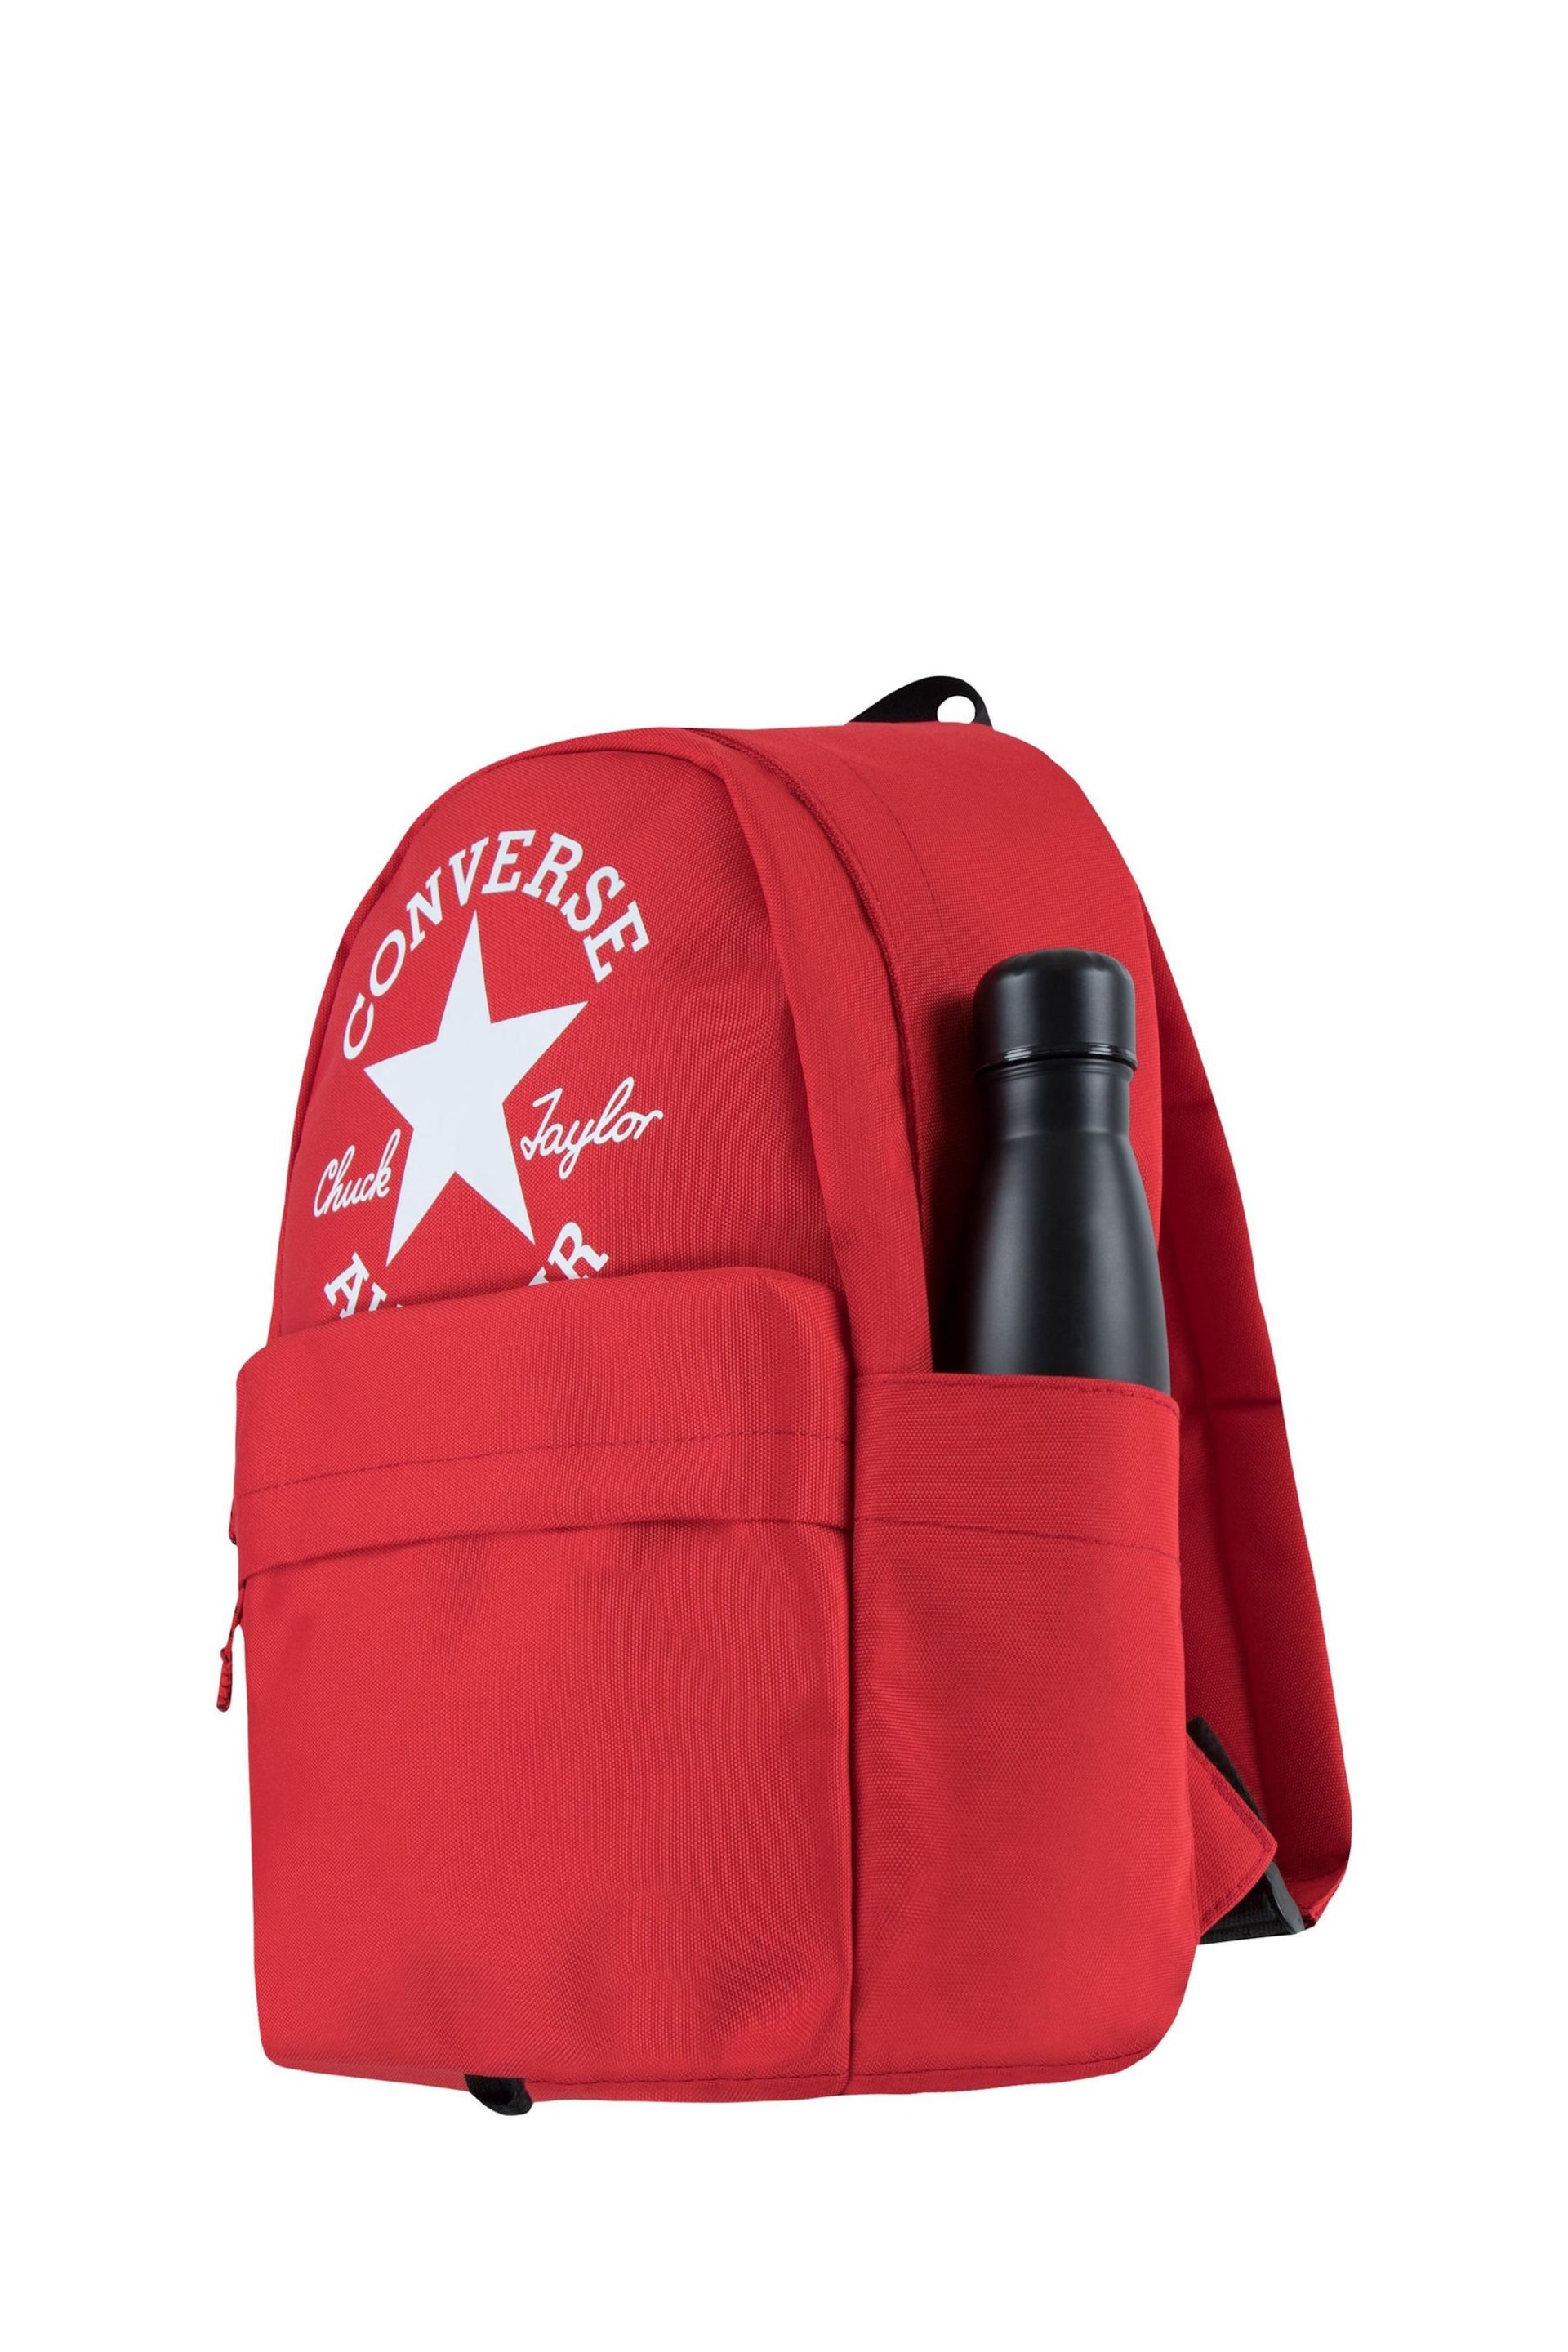 Converse Red Kids Backpack - Image 5 of 10